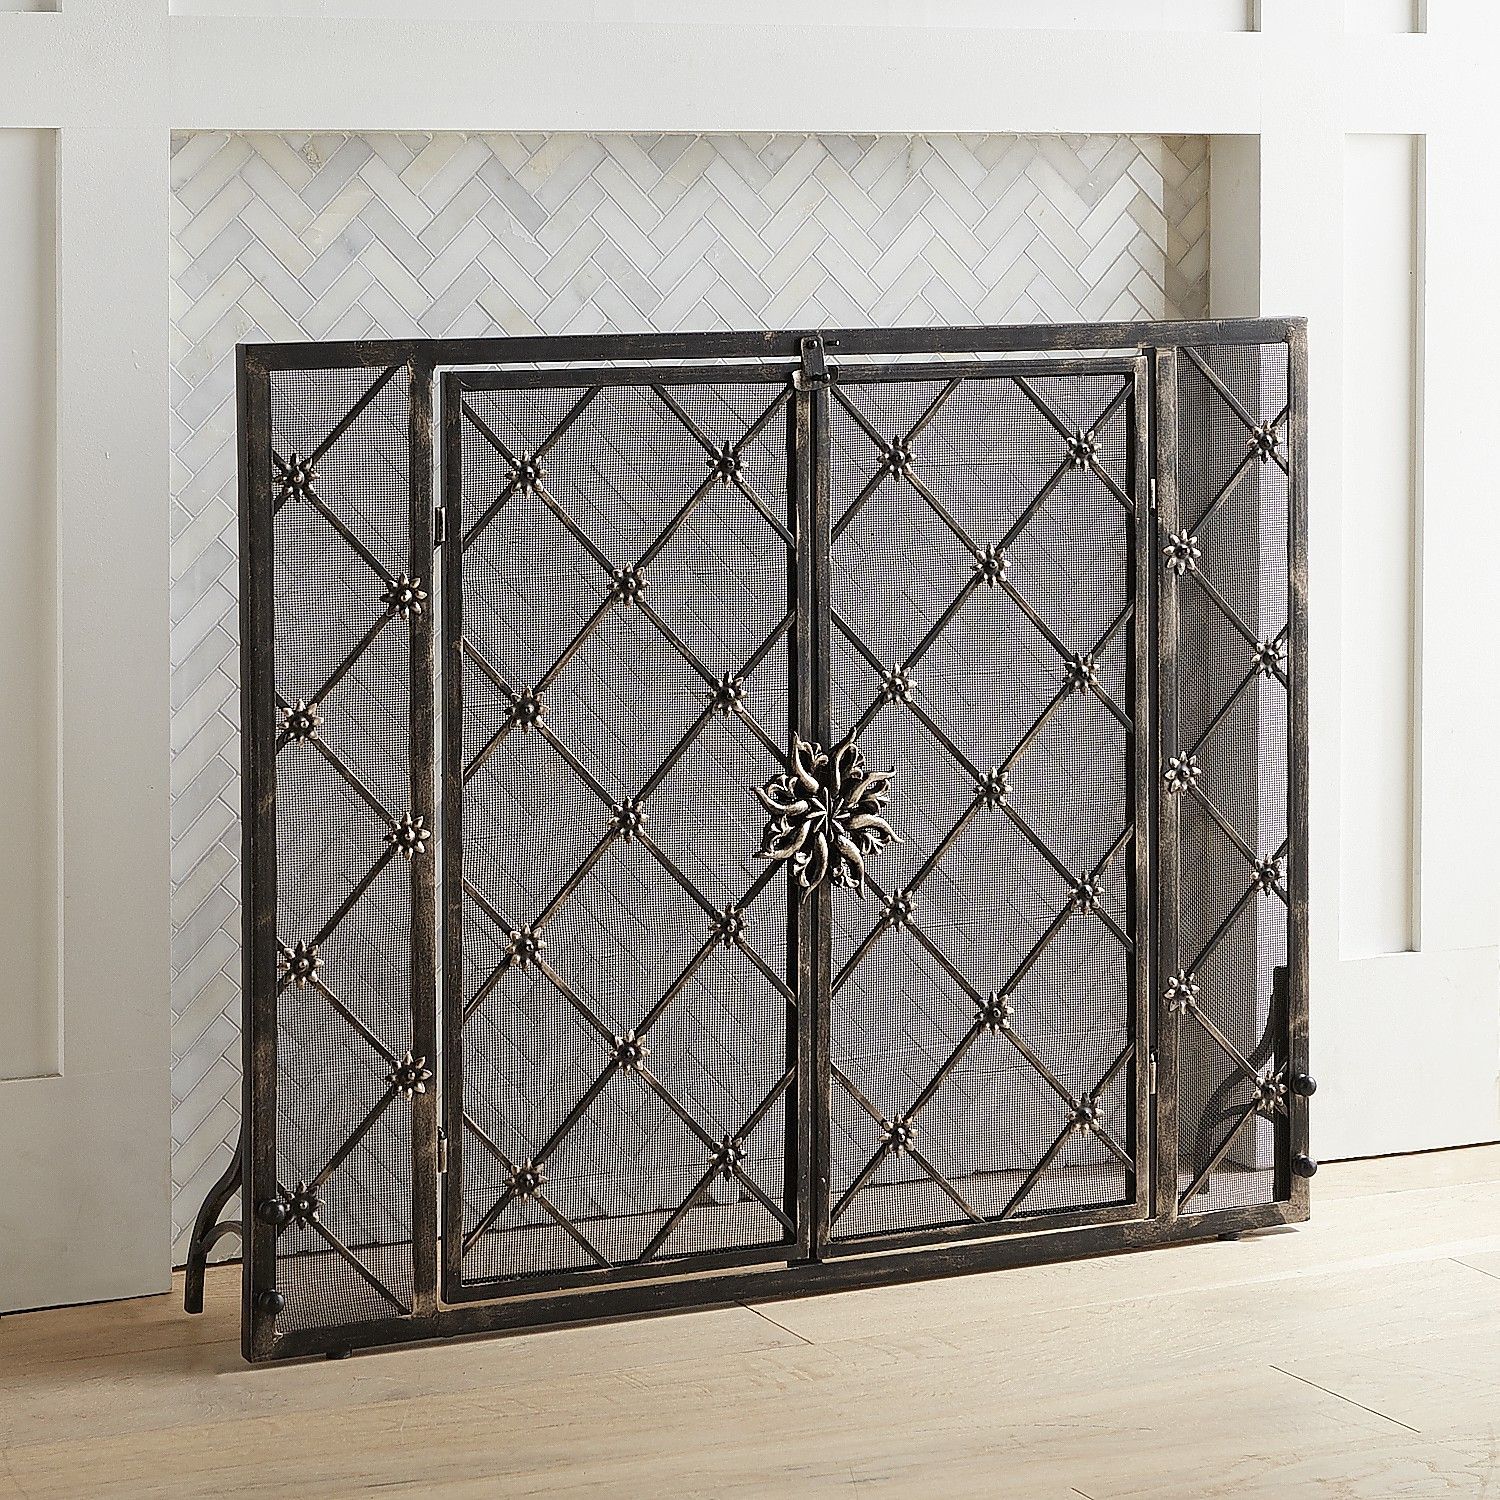 Glass Fireplace Screens Freestanding Unique Junction Fireplace Screen In 2019 Products